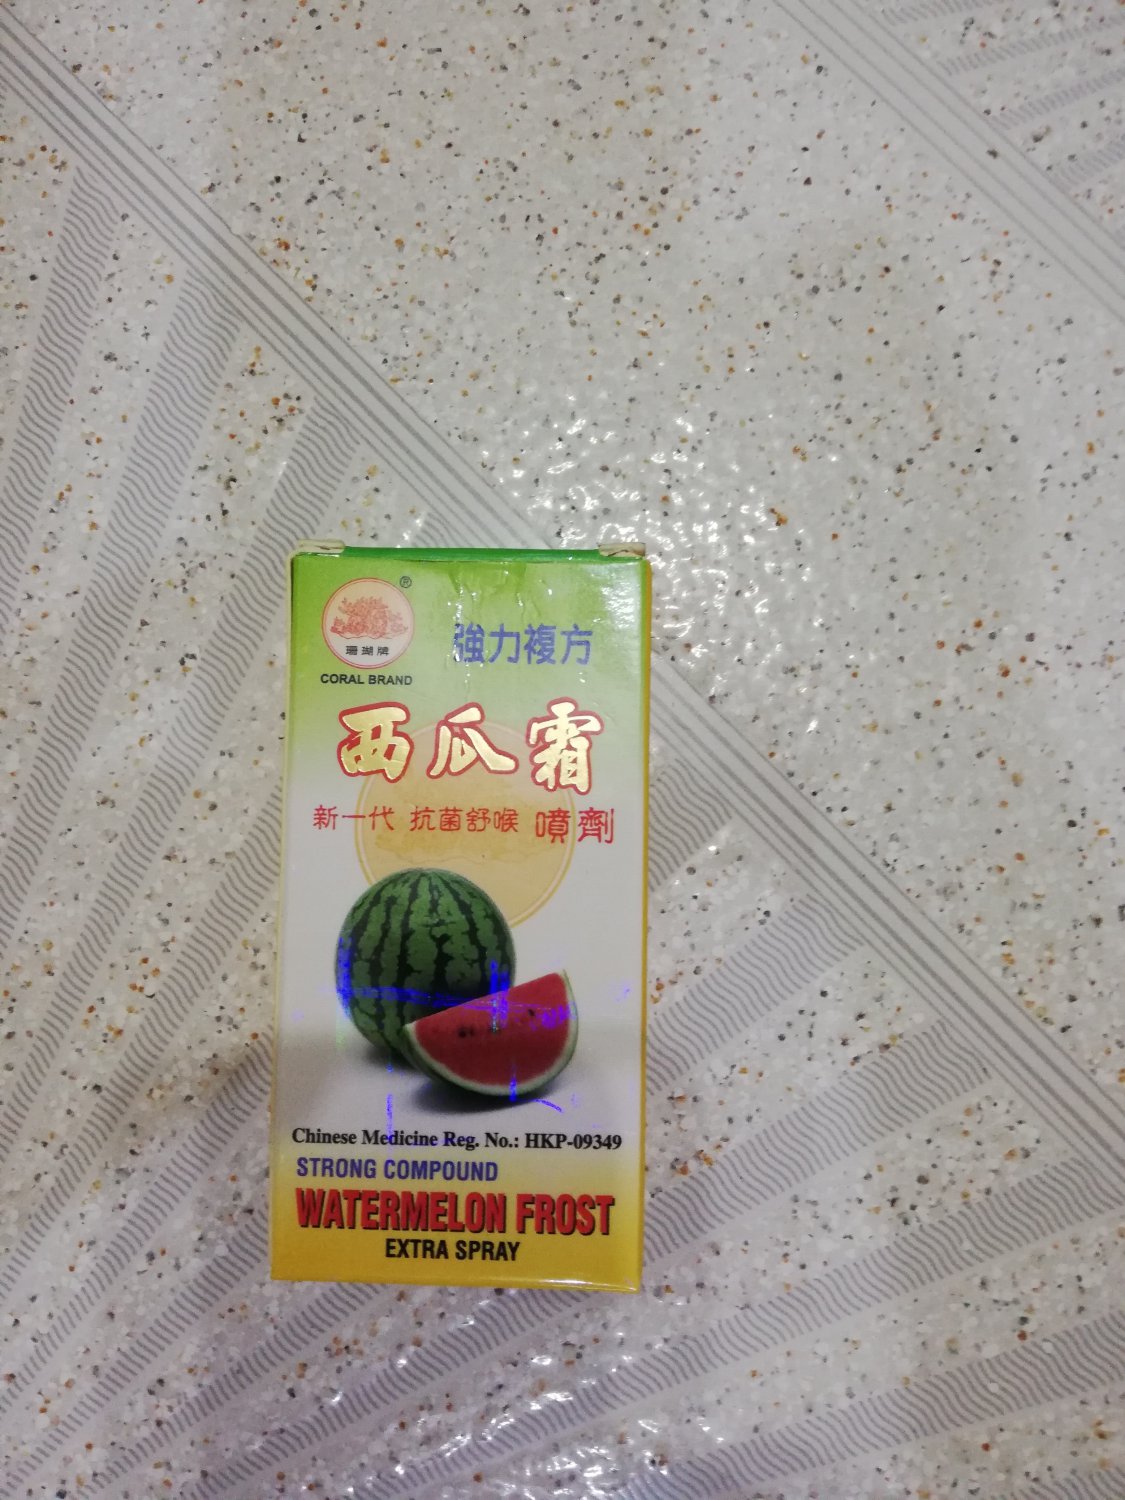 Coral Brand Watermelon Frost Spray (Pack of 2 bottles)